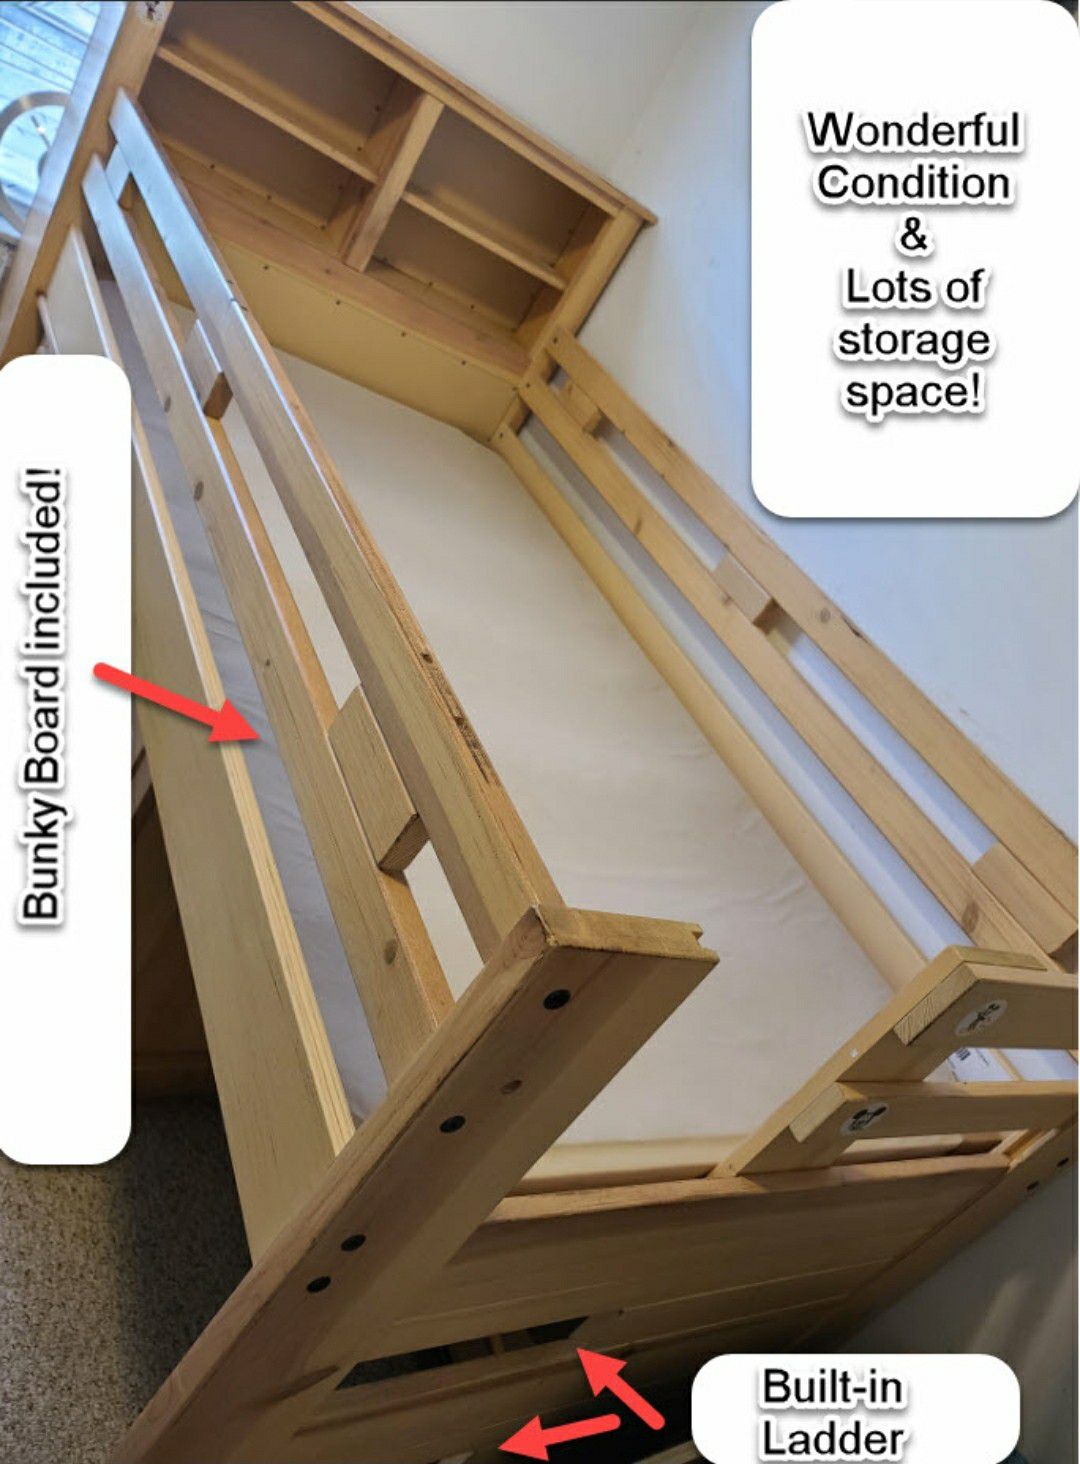 WOOD TWIN LOFT BED - mattress & bunky board included! * THIS WEEKEND ONLY *